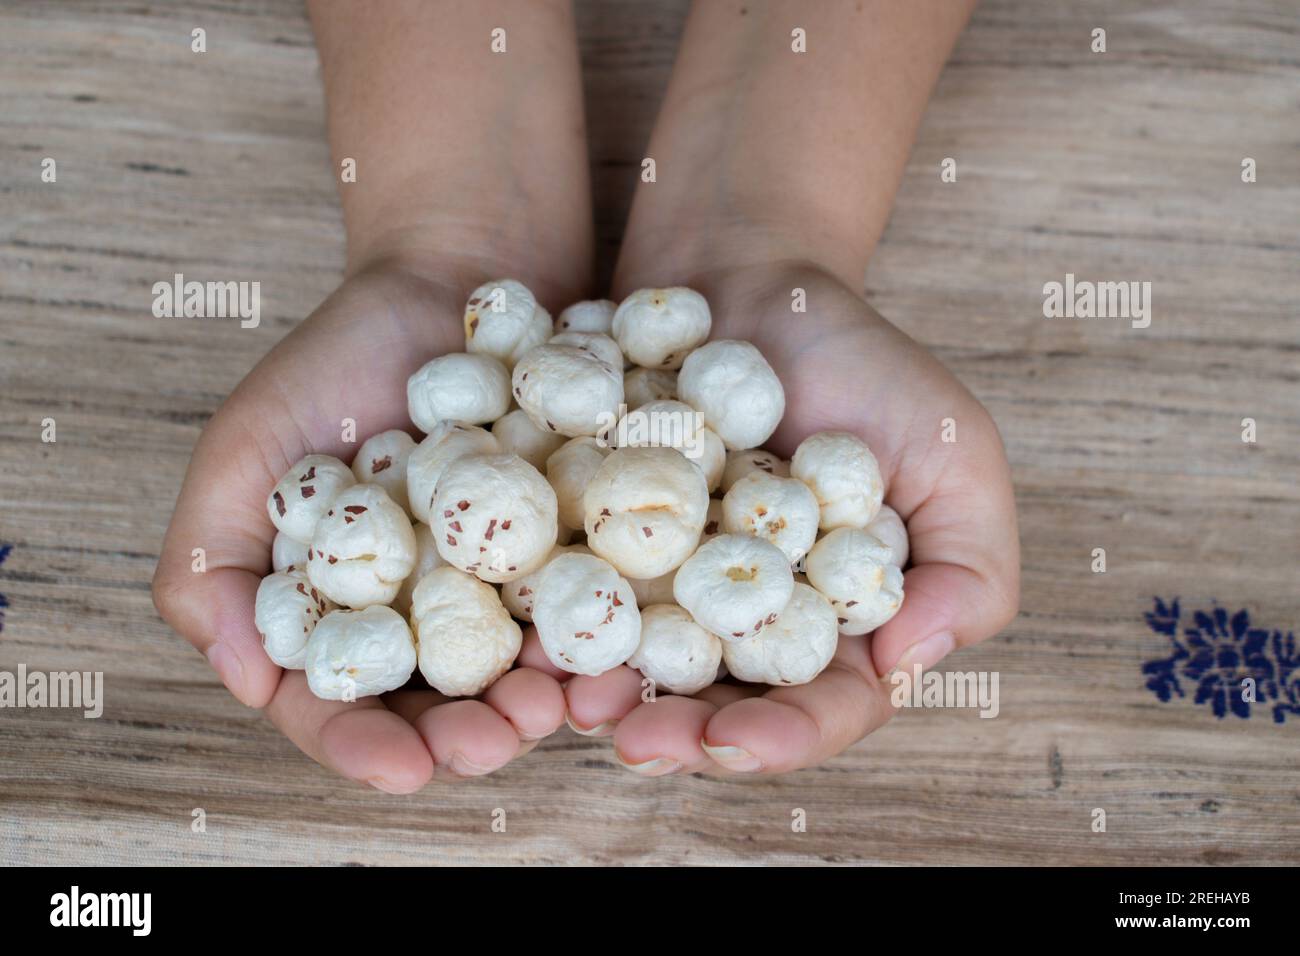 Makhana or foxnut in hand with brown background Stock Photo